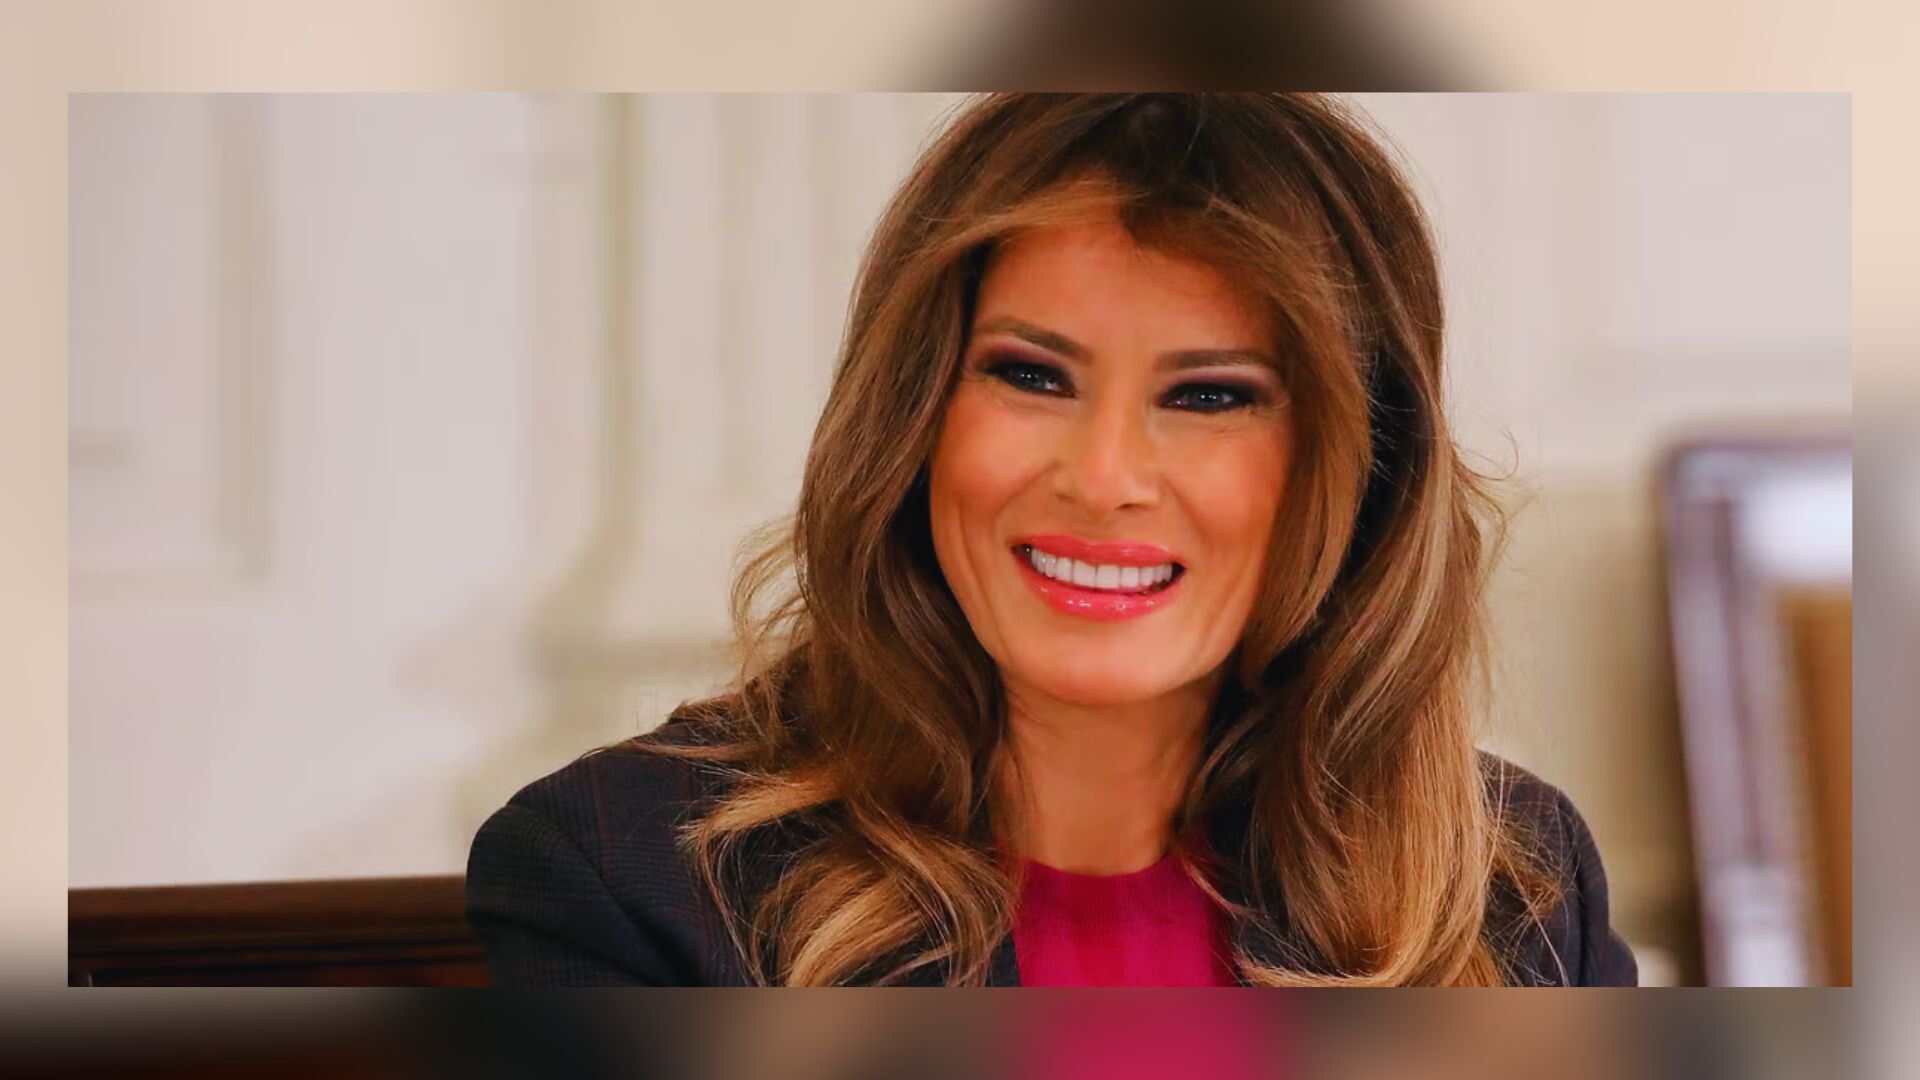 Melania Trump’s First Memoir: A ‘Powerful Story’ With Never-Before-Seen Family Photos